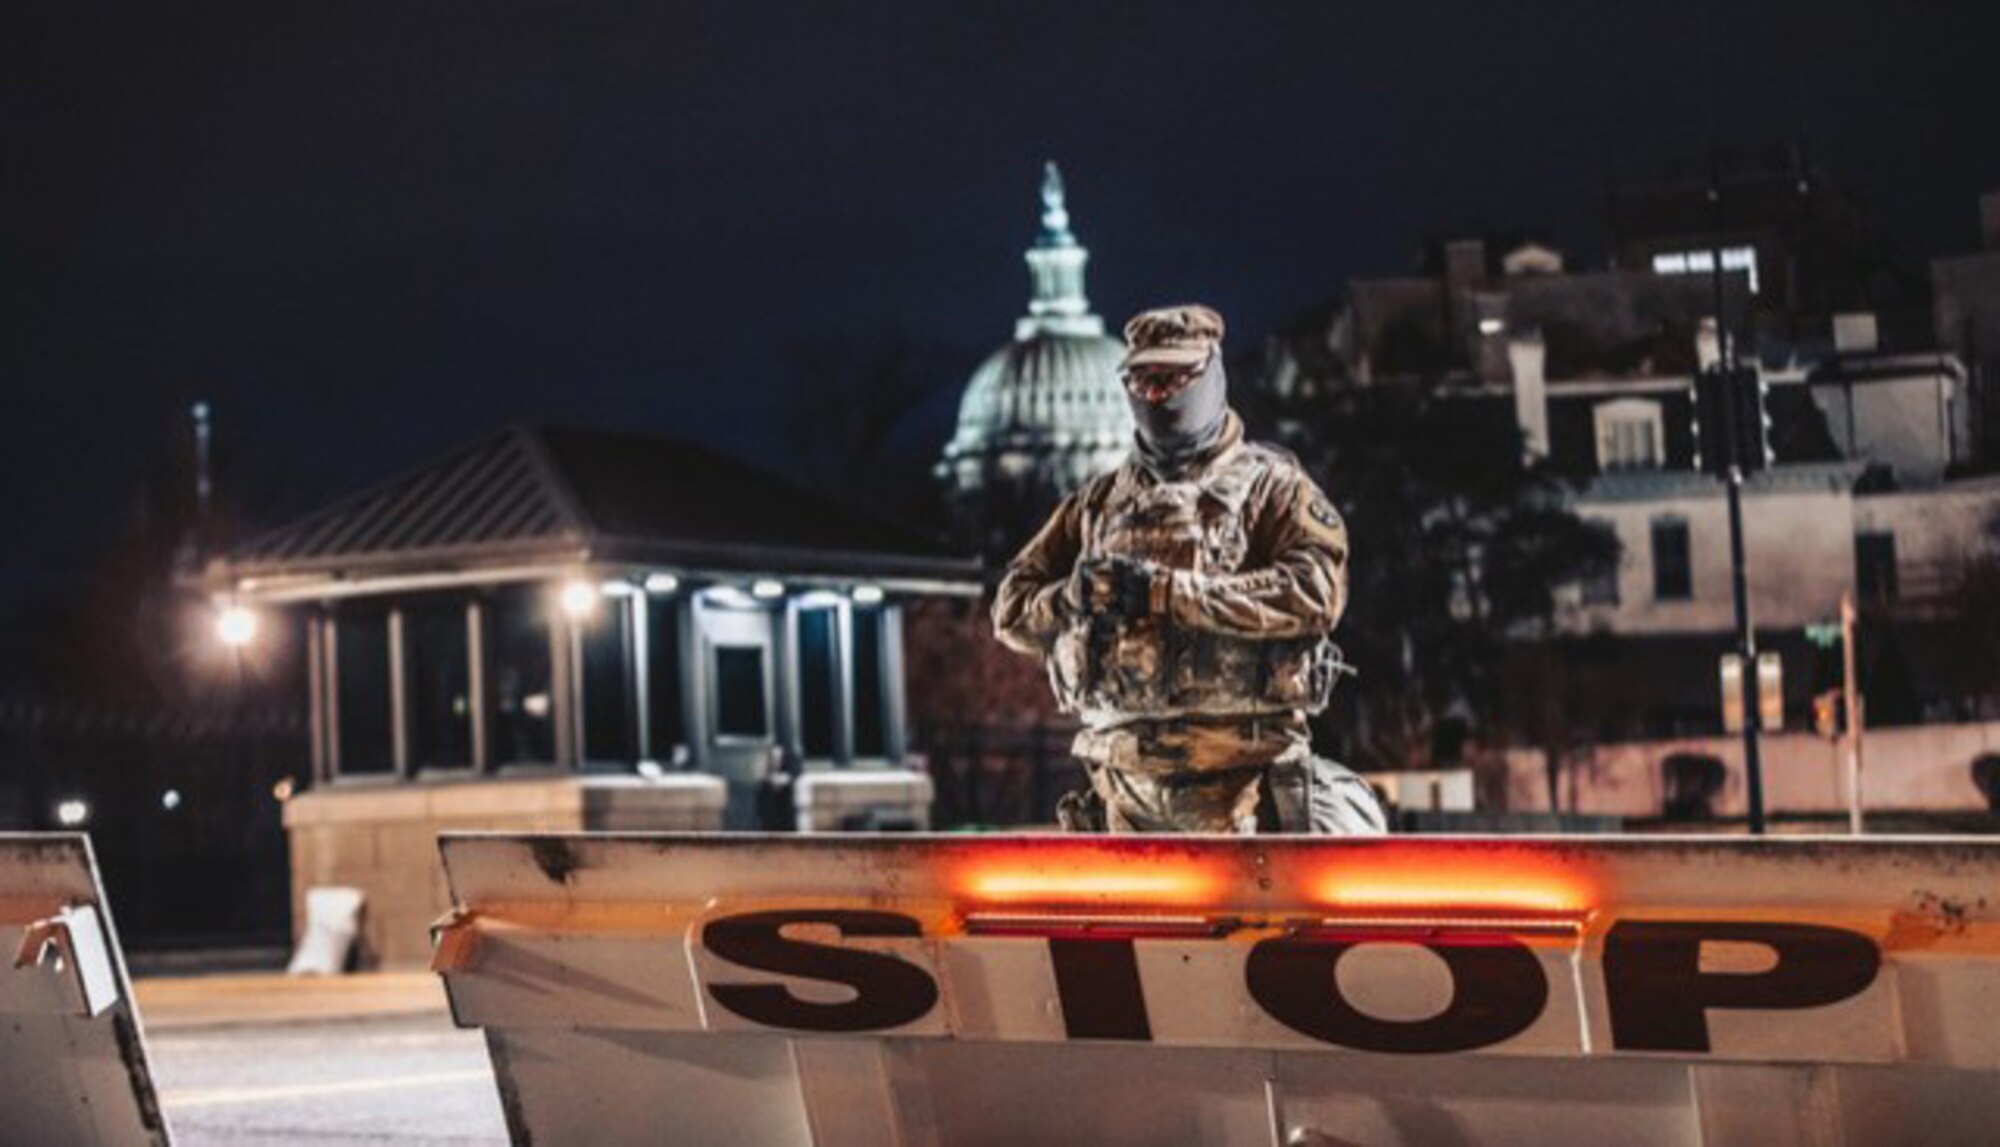 Over 750 Soldiers and Airmen with the Tennessee National Guard are supporting law enforcement at the U.S. Capitol for the 59th presidential inauguration in Washington on Jan. 20.